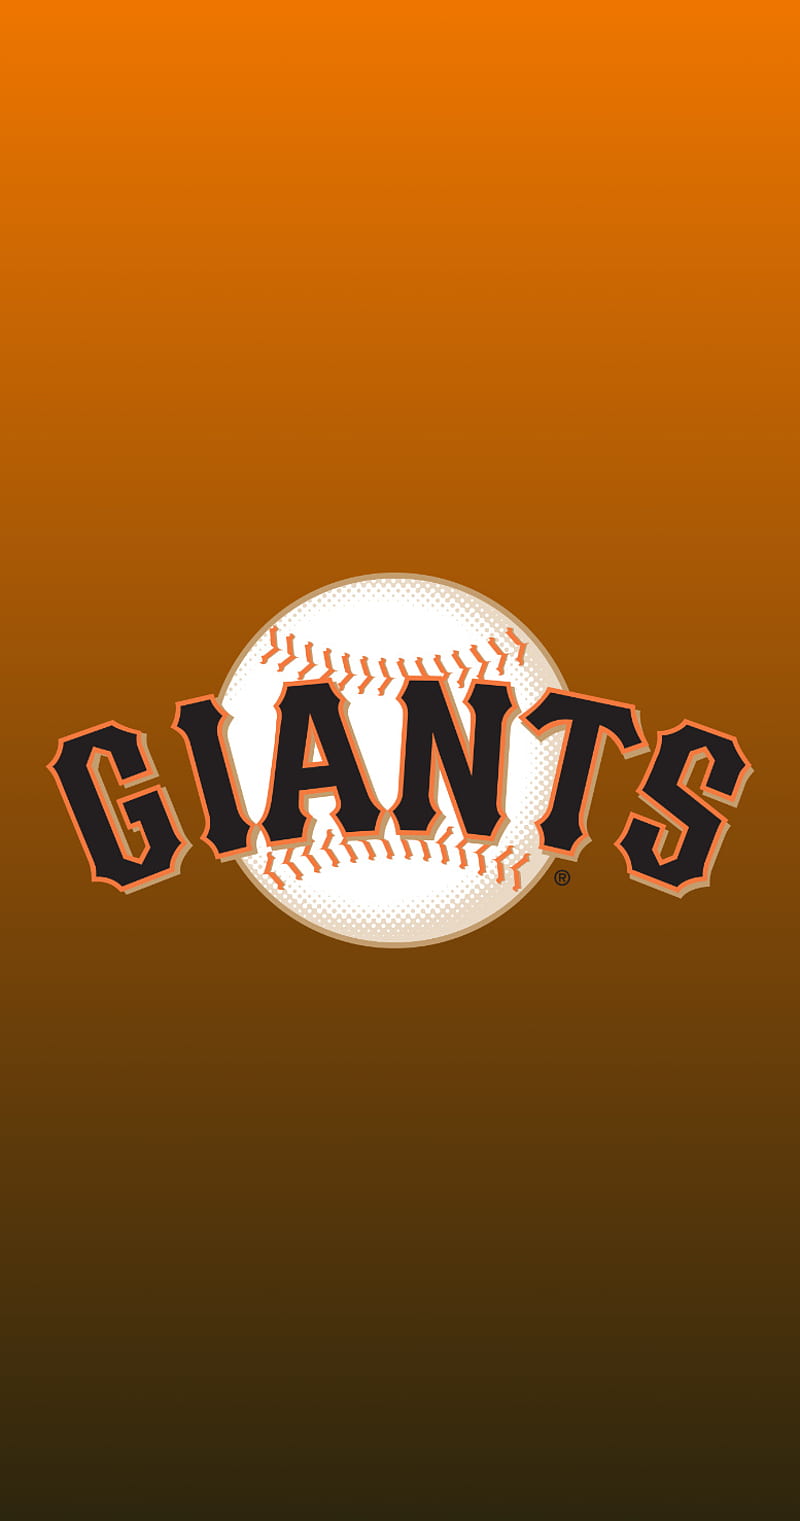 Lamonte Wades blast highlights SF Giants loss to Baltimore Orioles